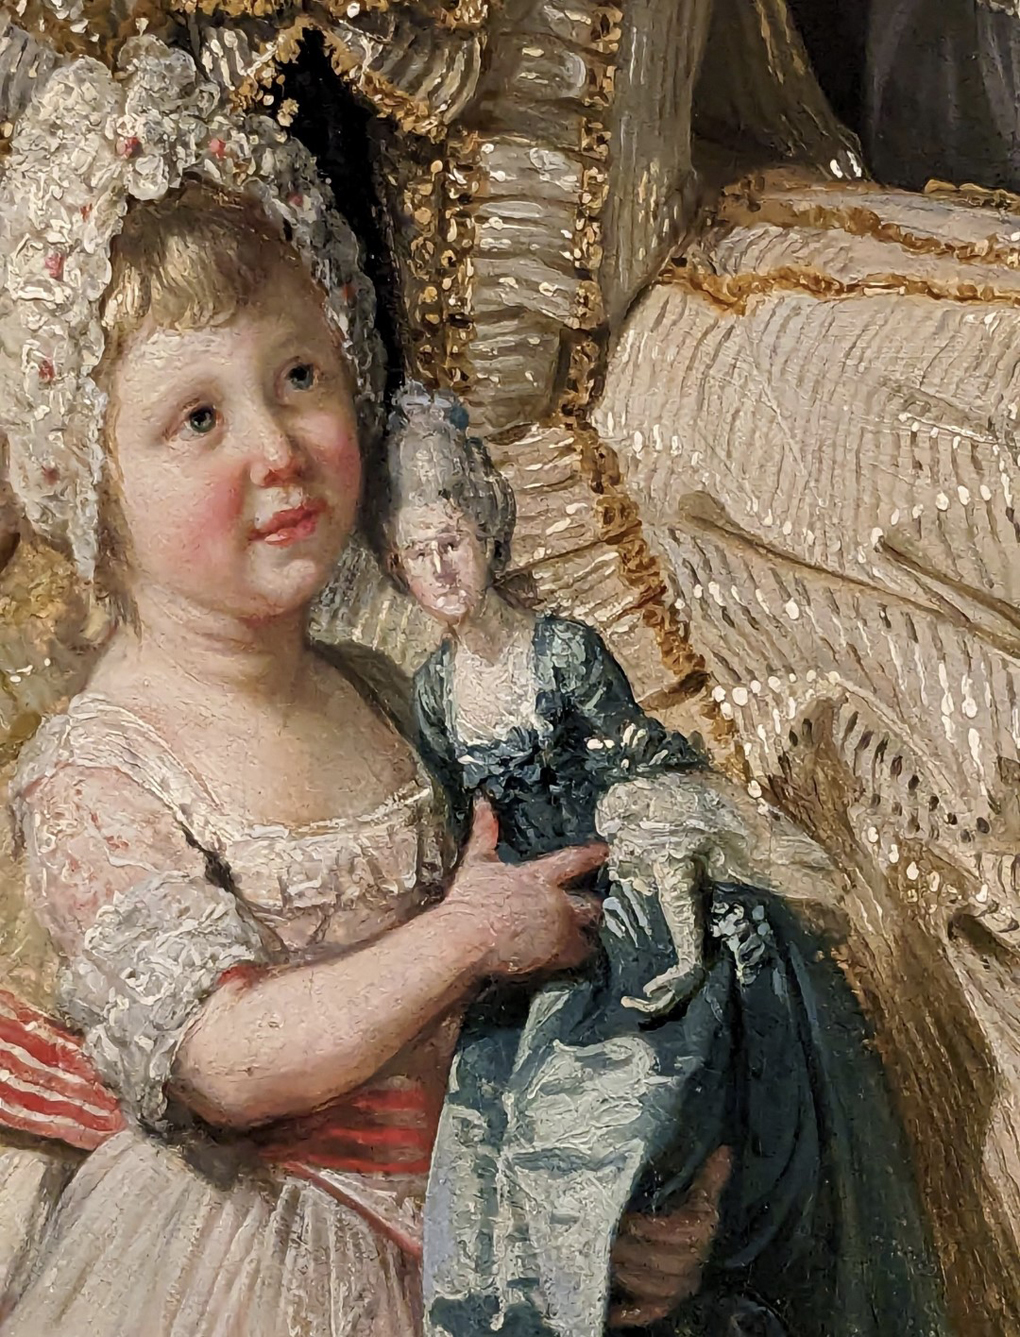 Small child with doll from painting 1800s